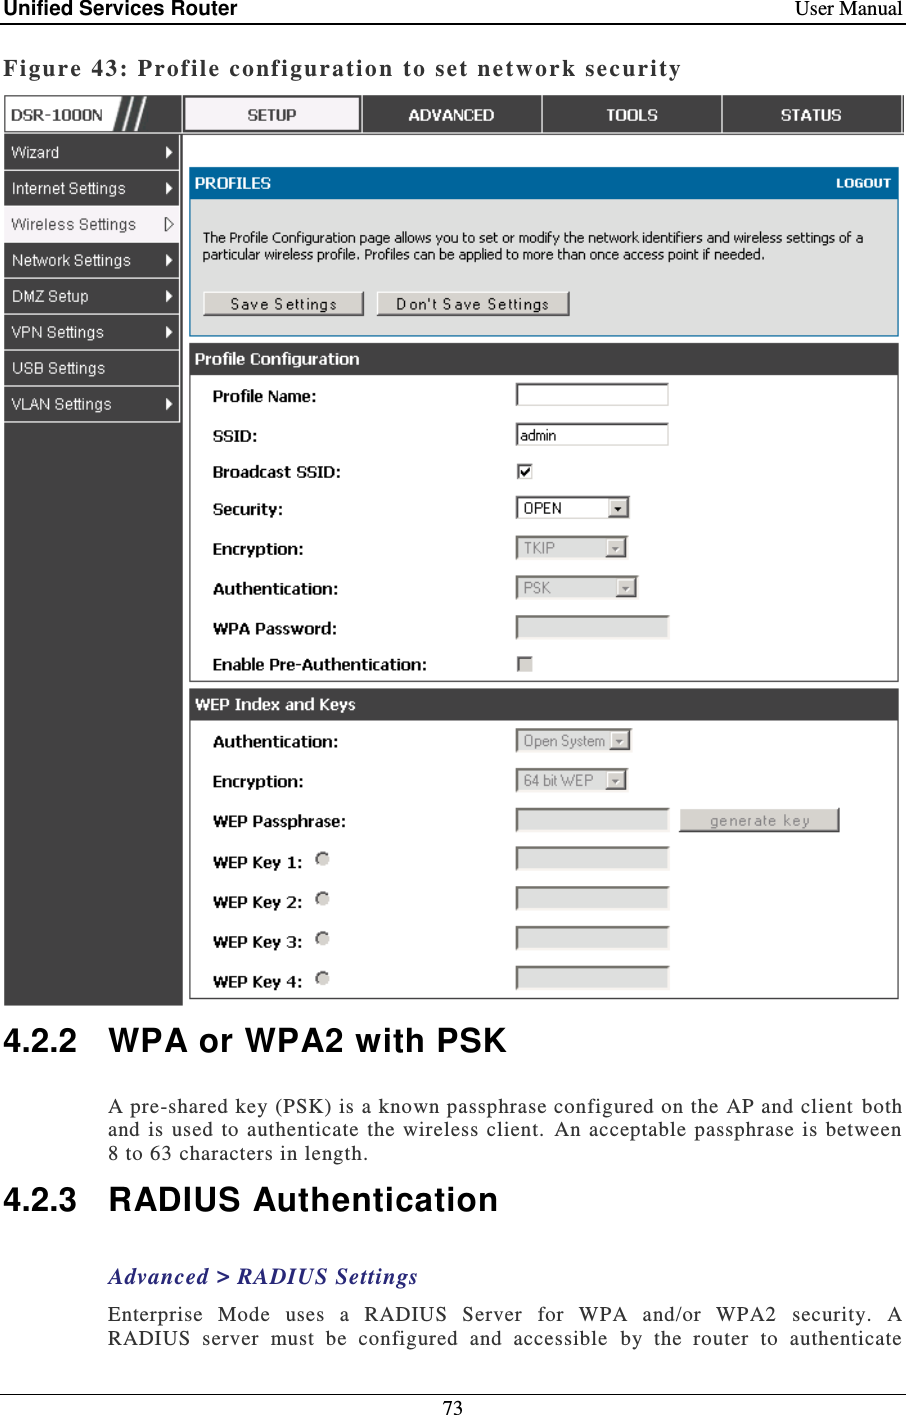 Unified Services Router    User Manual 73  Figure 43: Profile configuration  to set  ne twor k security   4.2.2  WPA or WPA2 with PSK A pre-shared key (PSK) is a known passphrase configured on the AP and client  both and  is used  to authenticate the  wireless  client.  An  acceptable  passphrase is  between 8 to 63 characters in length.  4.2.3  RADIUS Authentication Advanced &gt; RADIUS Settings Enterprise  Mode  uses  a  RADIUS  Server  for  WPA  and/or  WPA2  security.  A RADIUS  server  must  be  configured  and  accessible  by  the  router  to  authenticate 